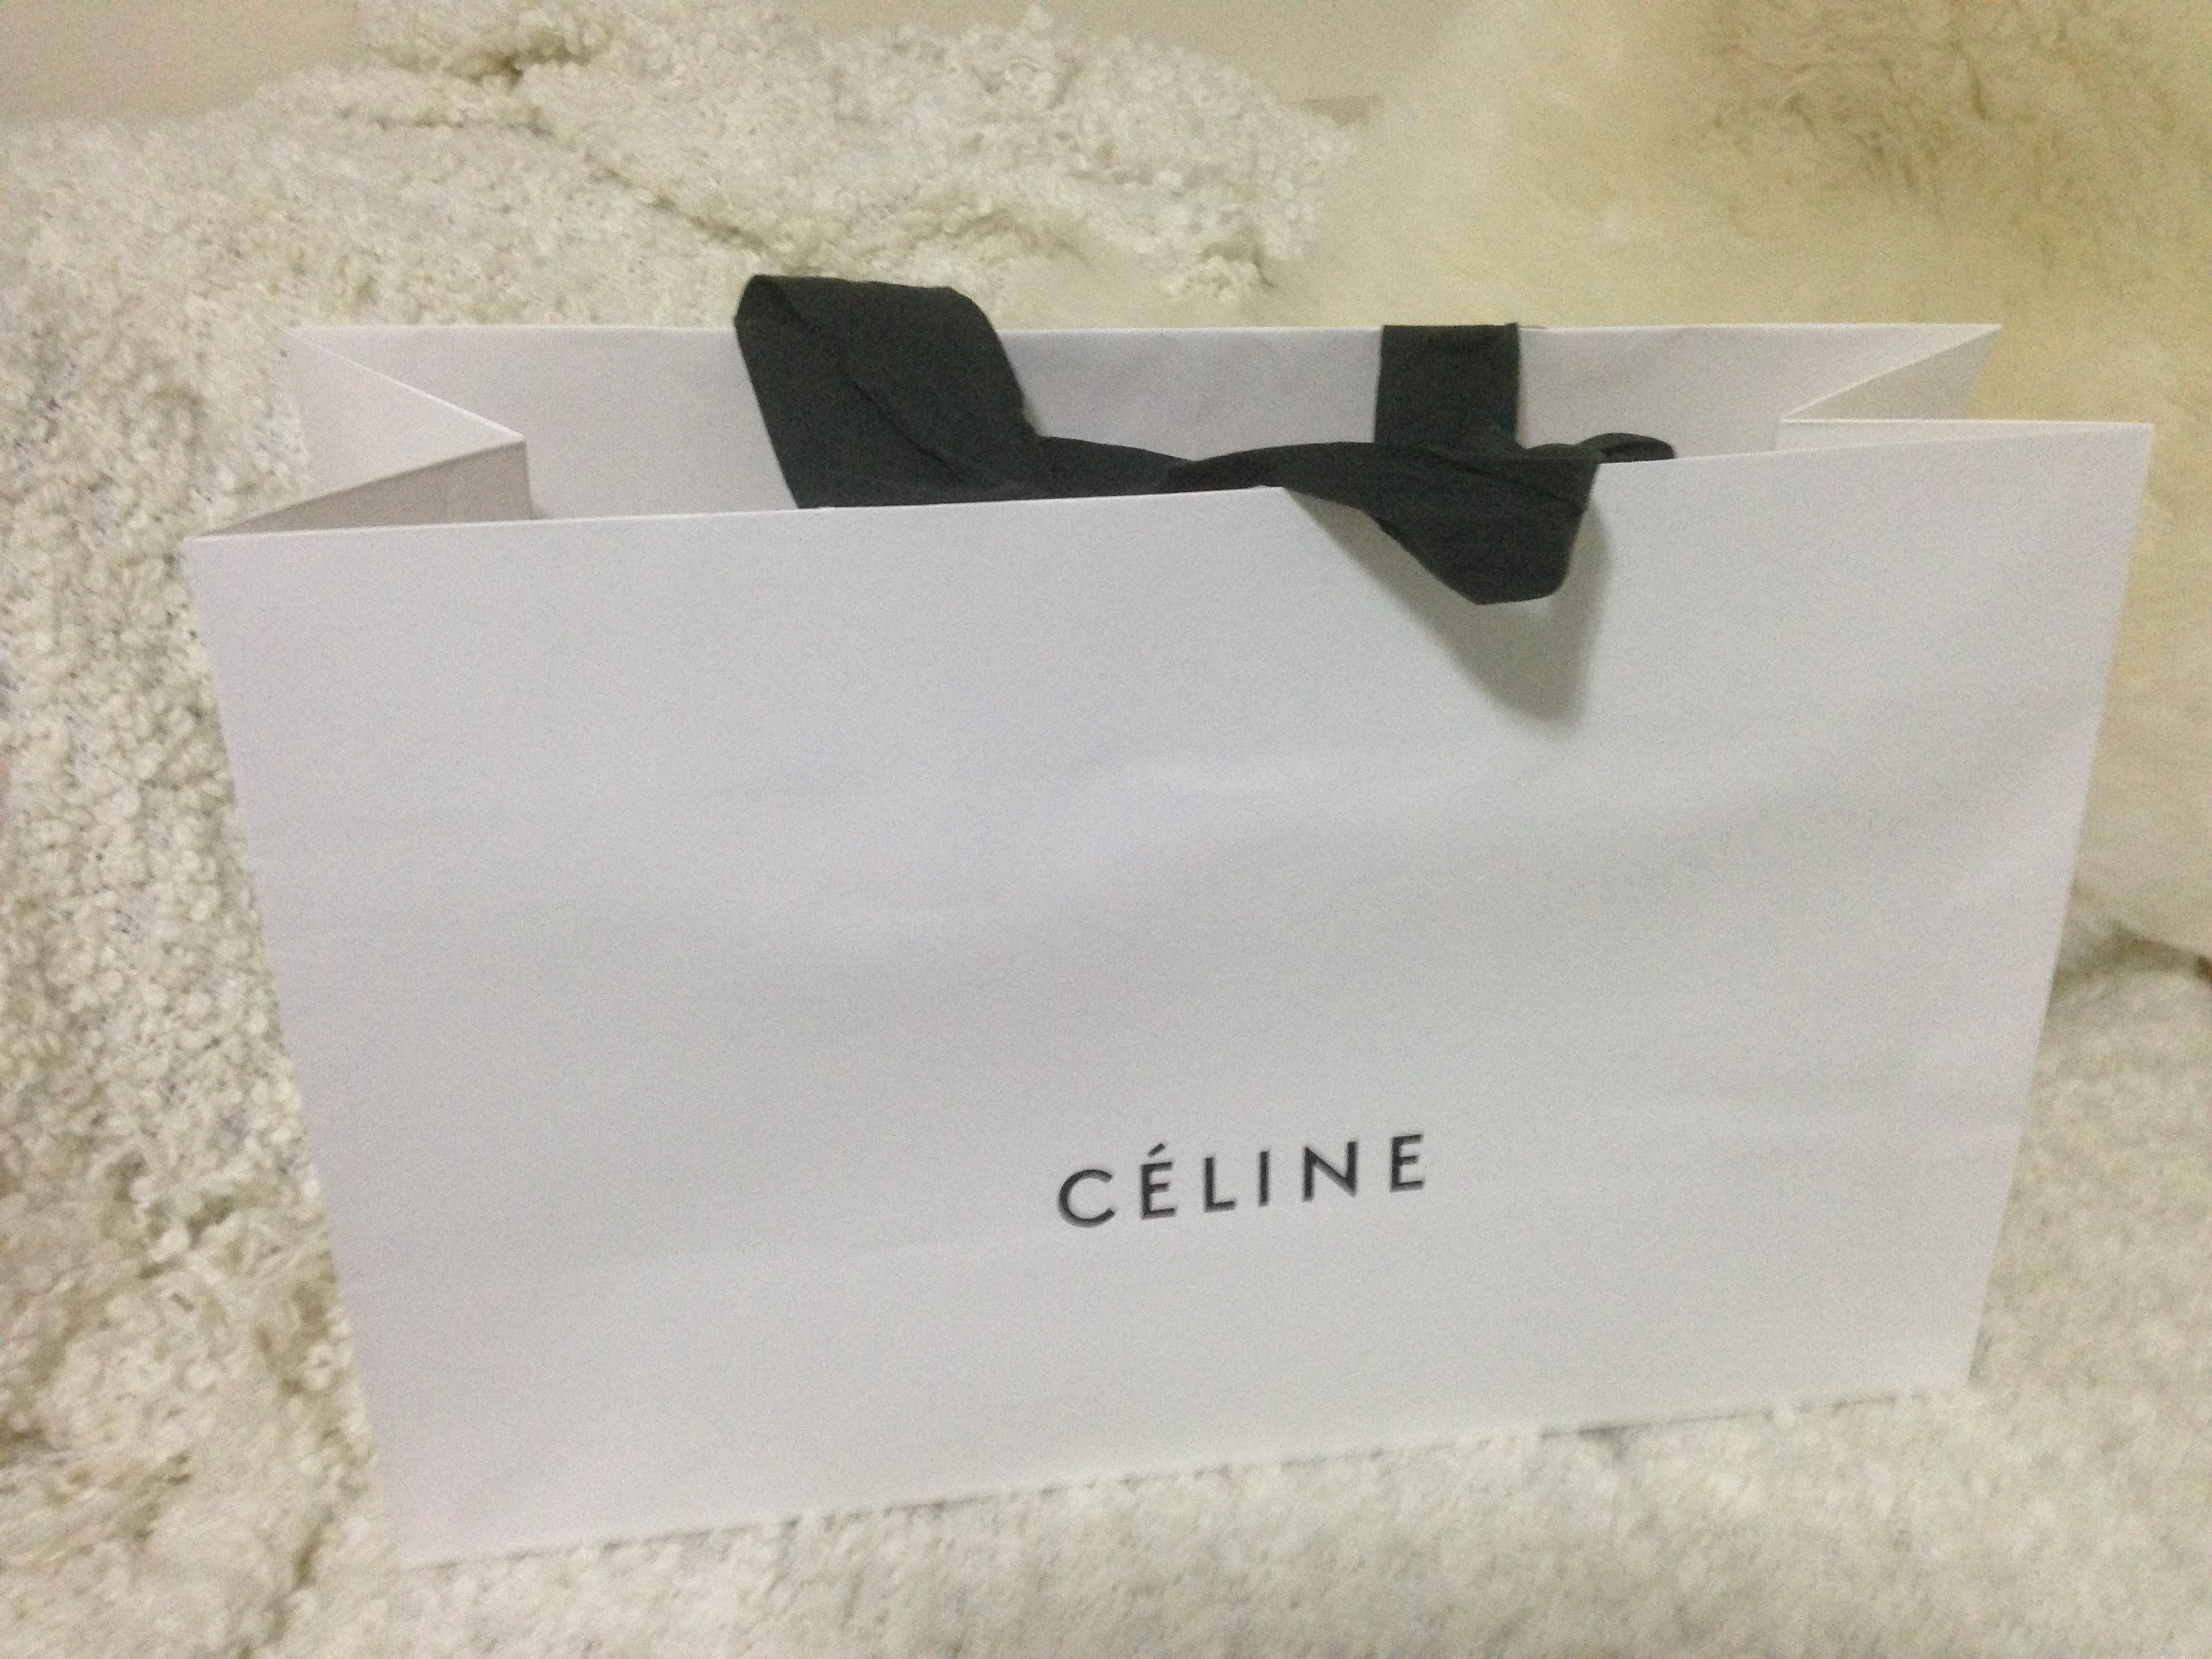 Celine Trapeze Bag – Ginger and Cream